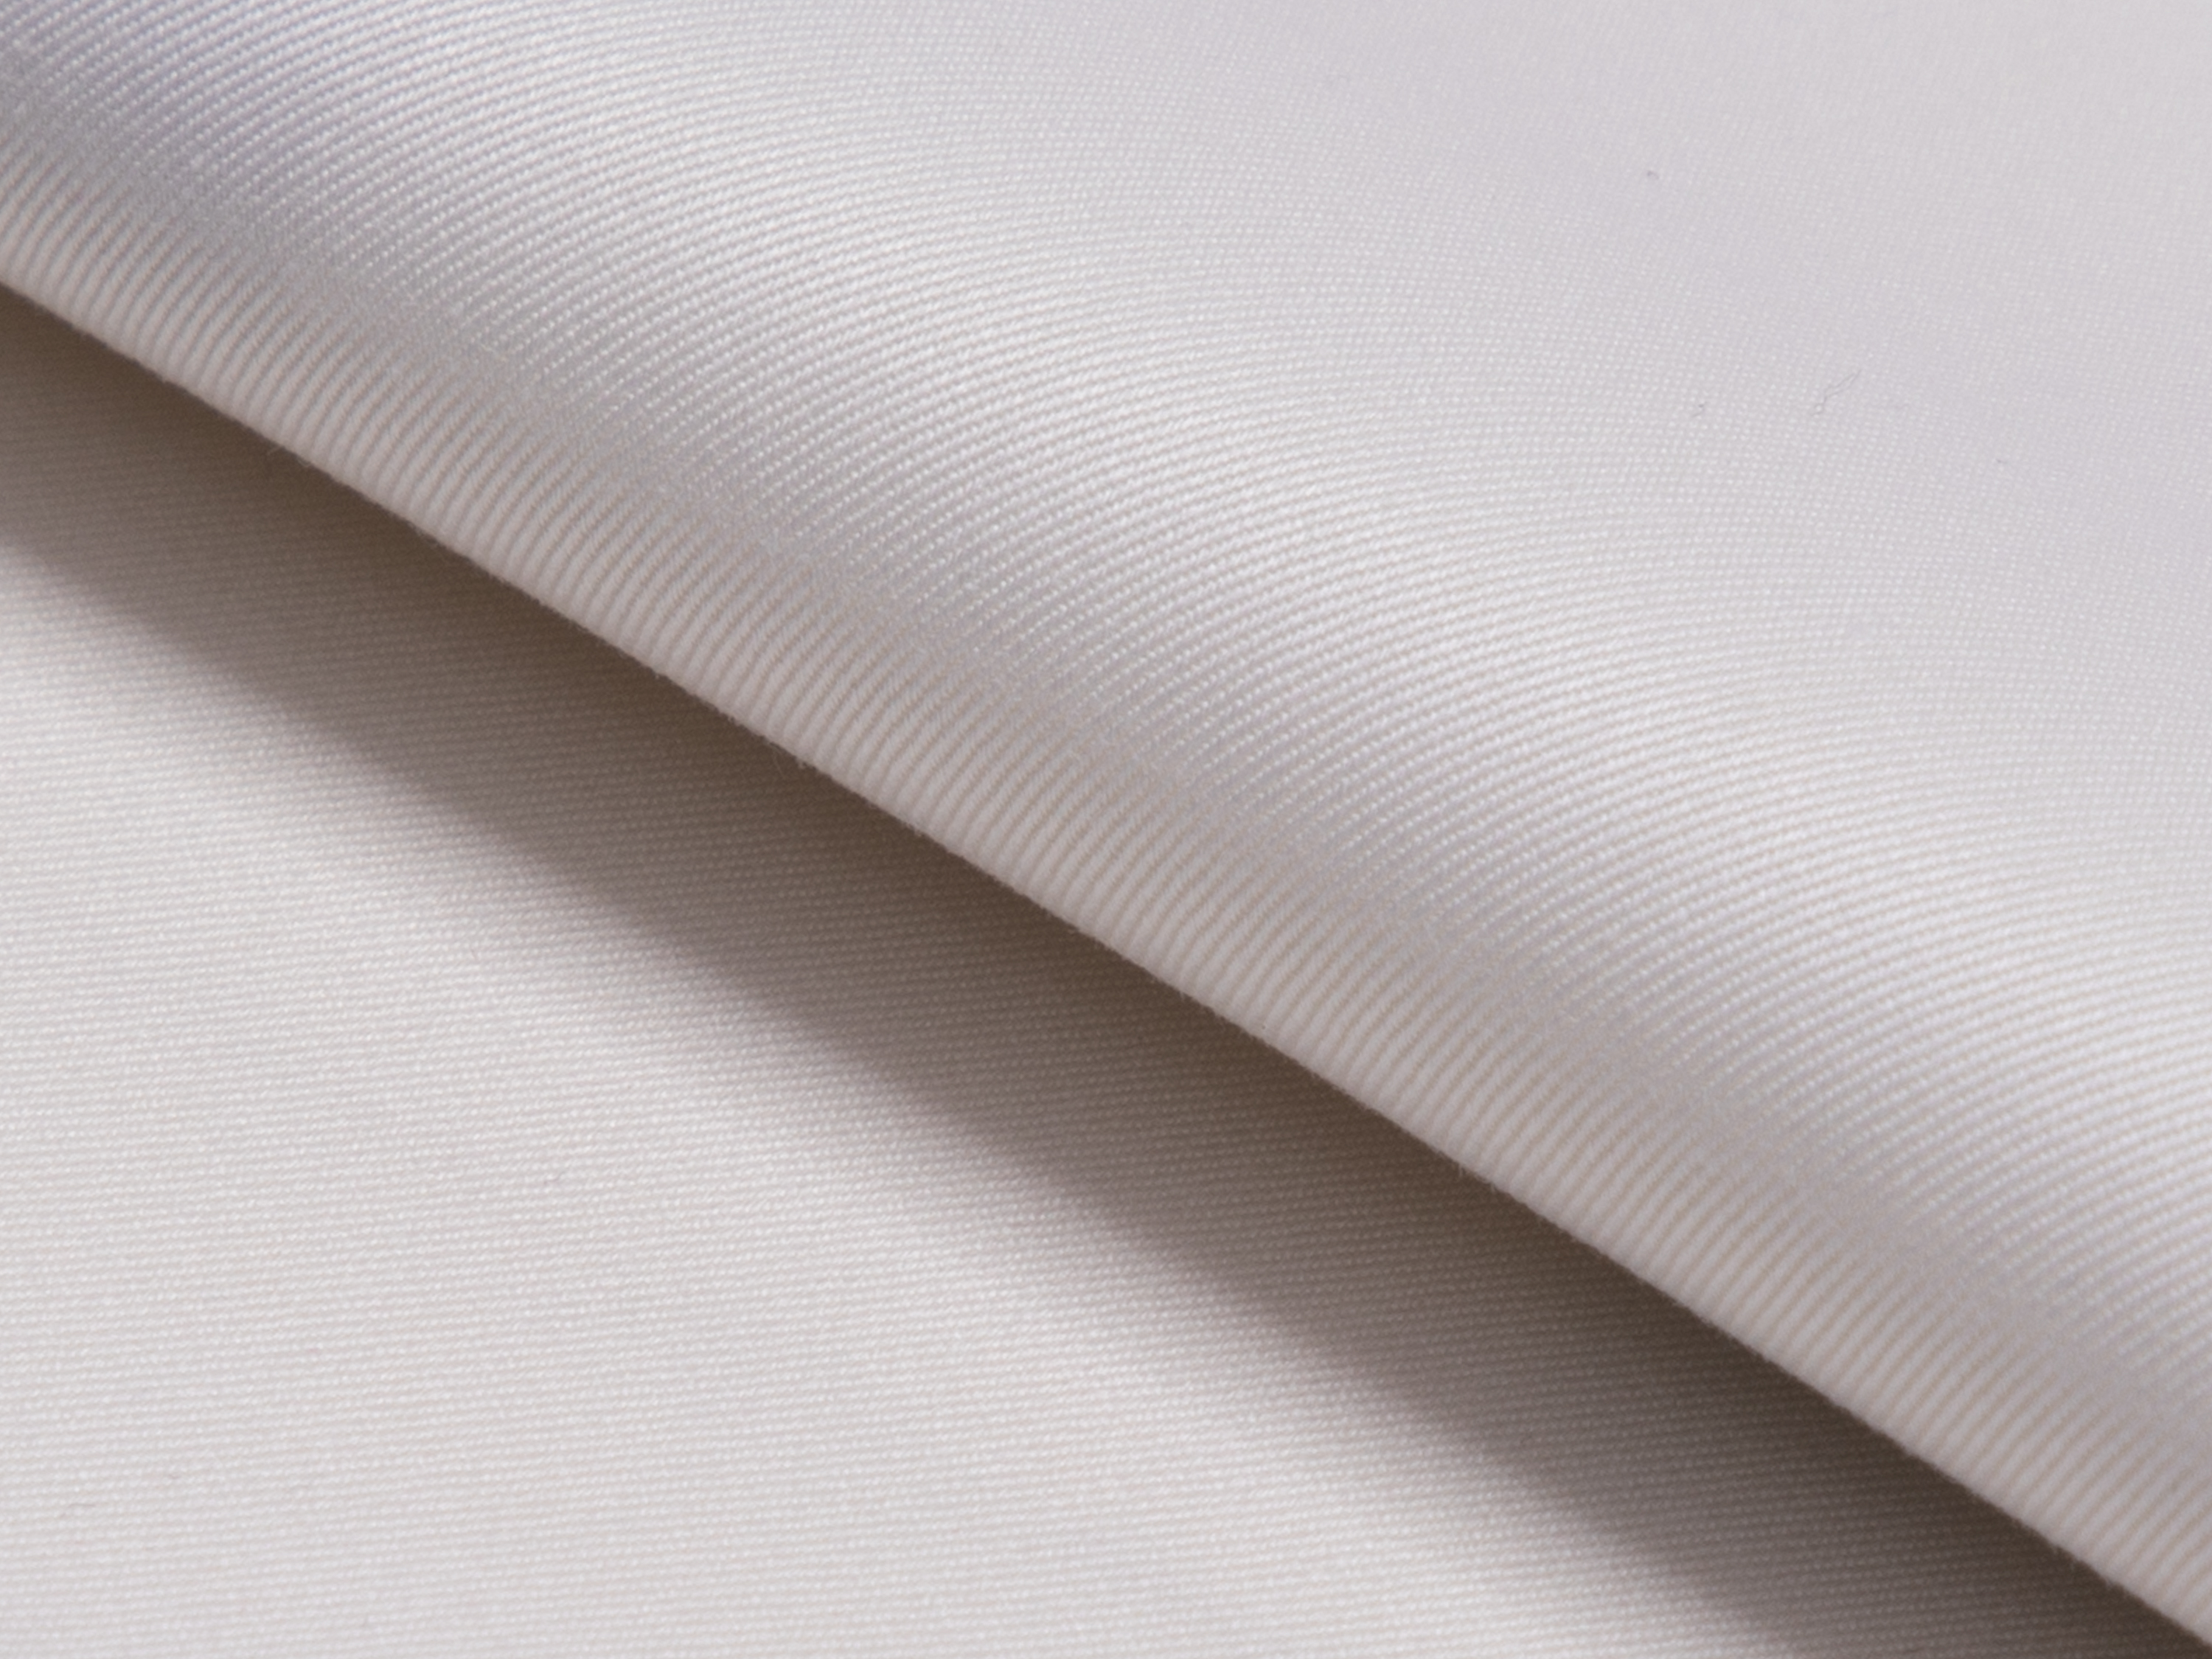 Buy tailor made shirts online -  - Twill Cream